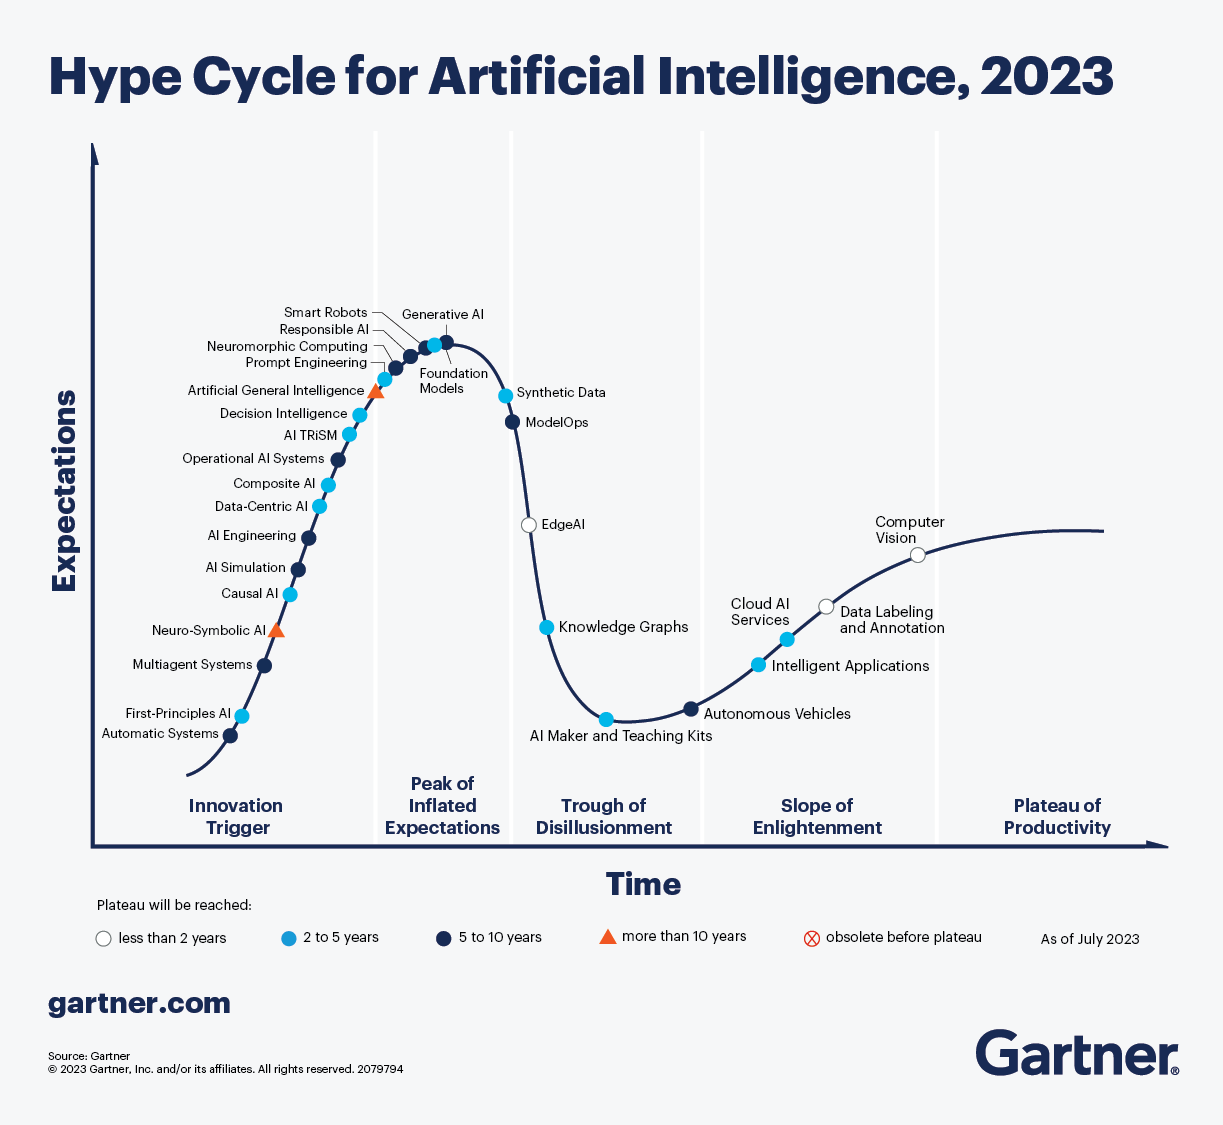 https://25048352.fs1.hubspotusercontent-eu1.net/hubfs/25048352/Imported_Blog_Media/hype-cycle-for-artificial-intelligence-2023.png